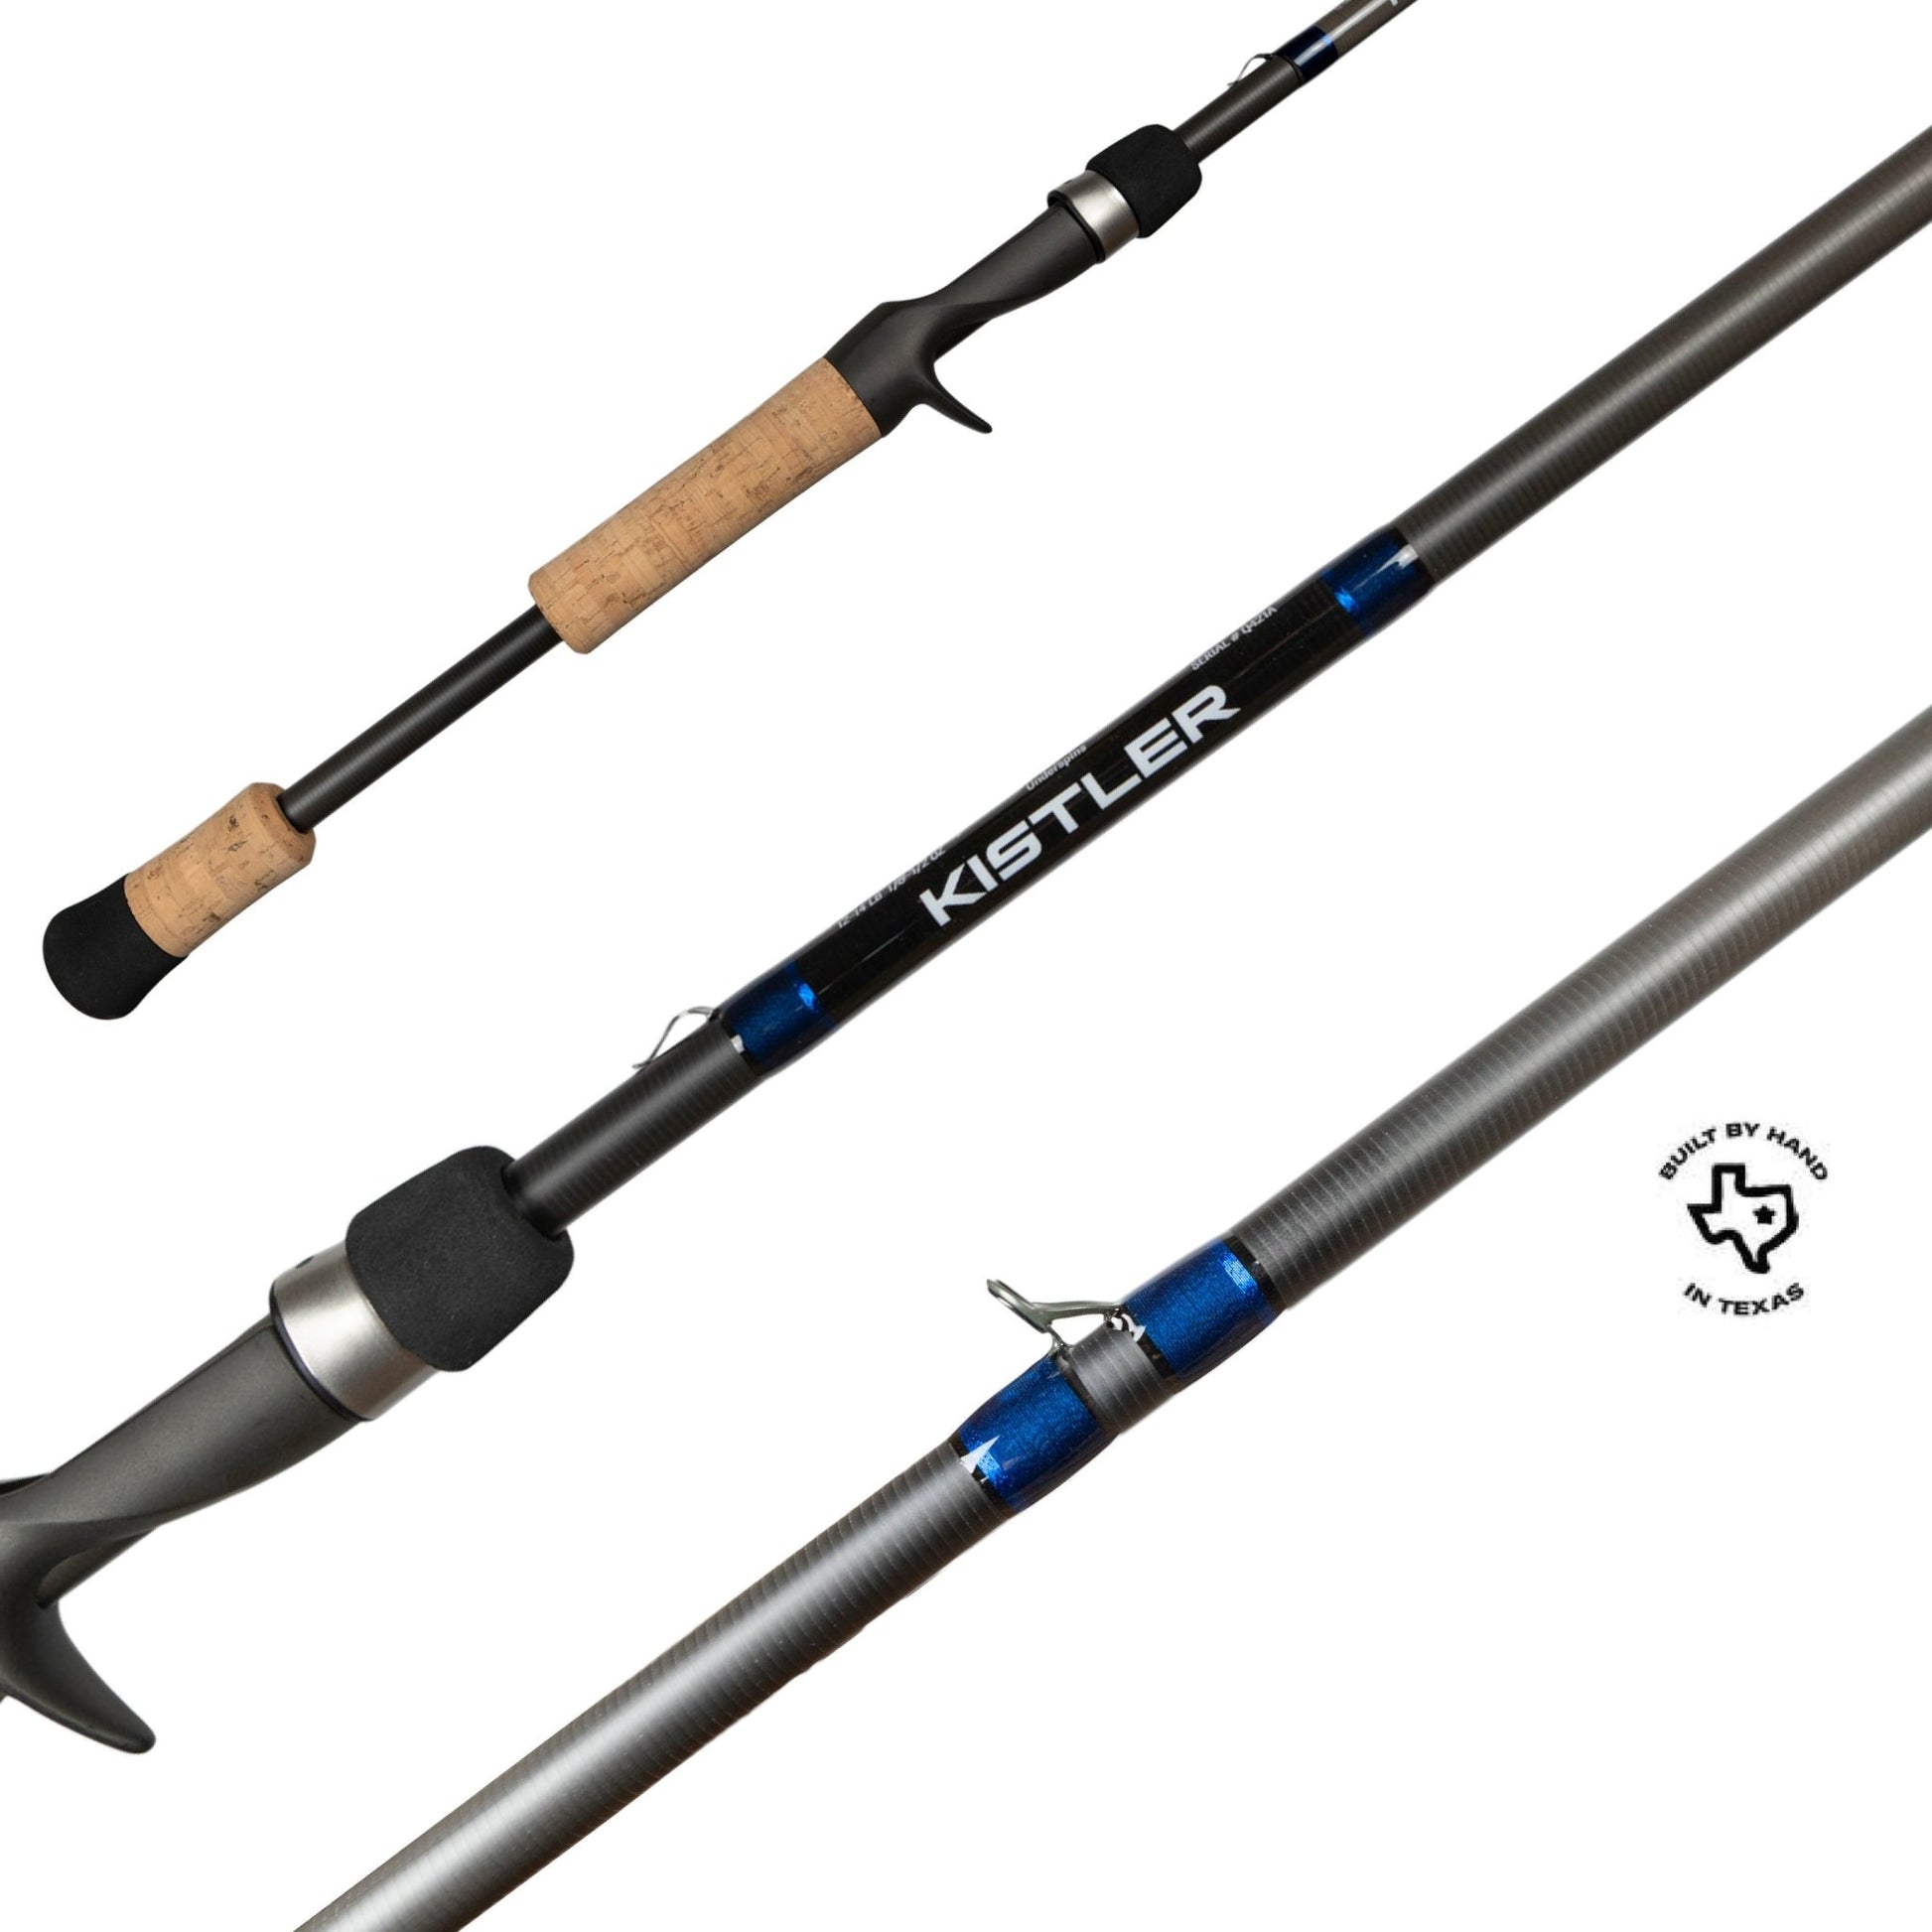 Kistler Helium Magnum Worm, Creatures, Jigs Casting Rods - Angler's Pro Tackle & Outdoors